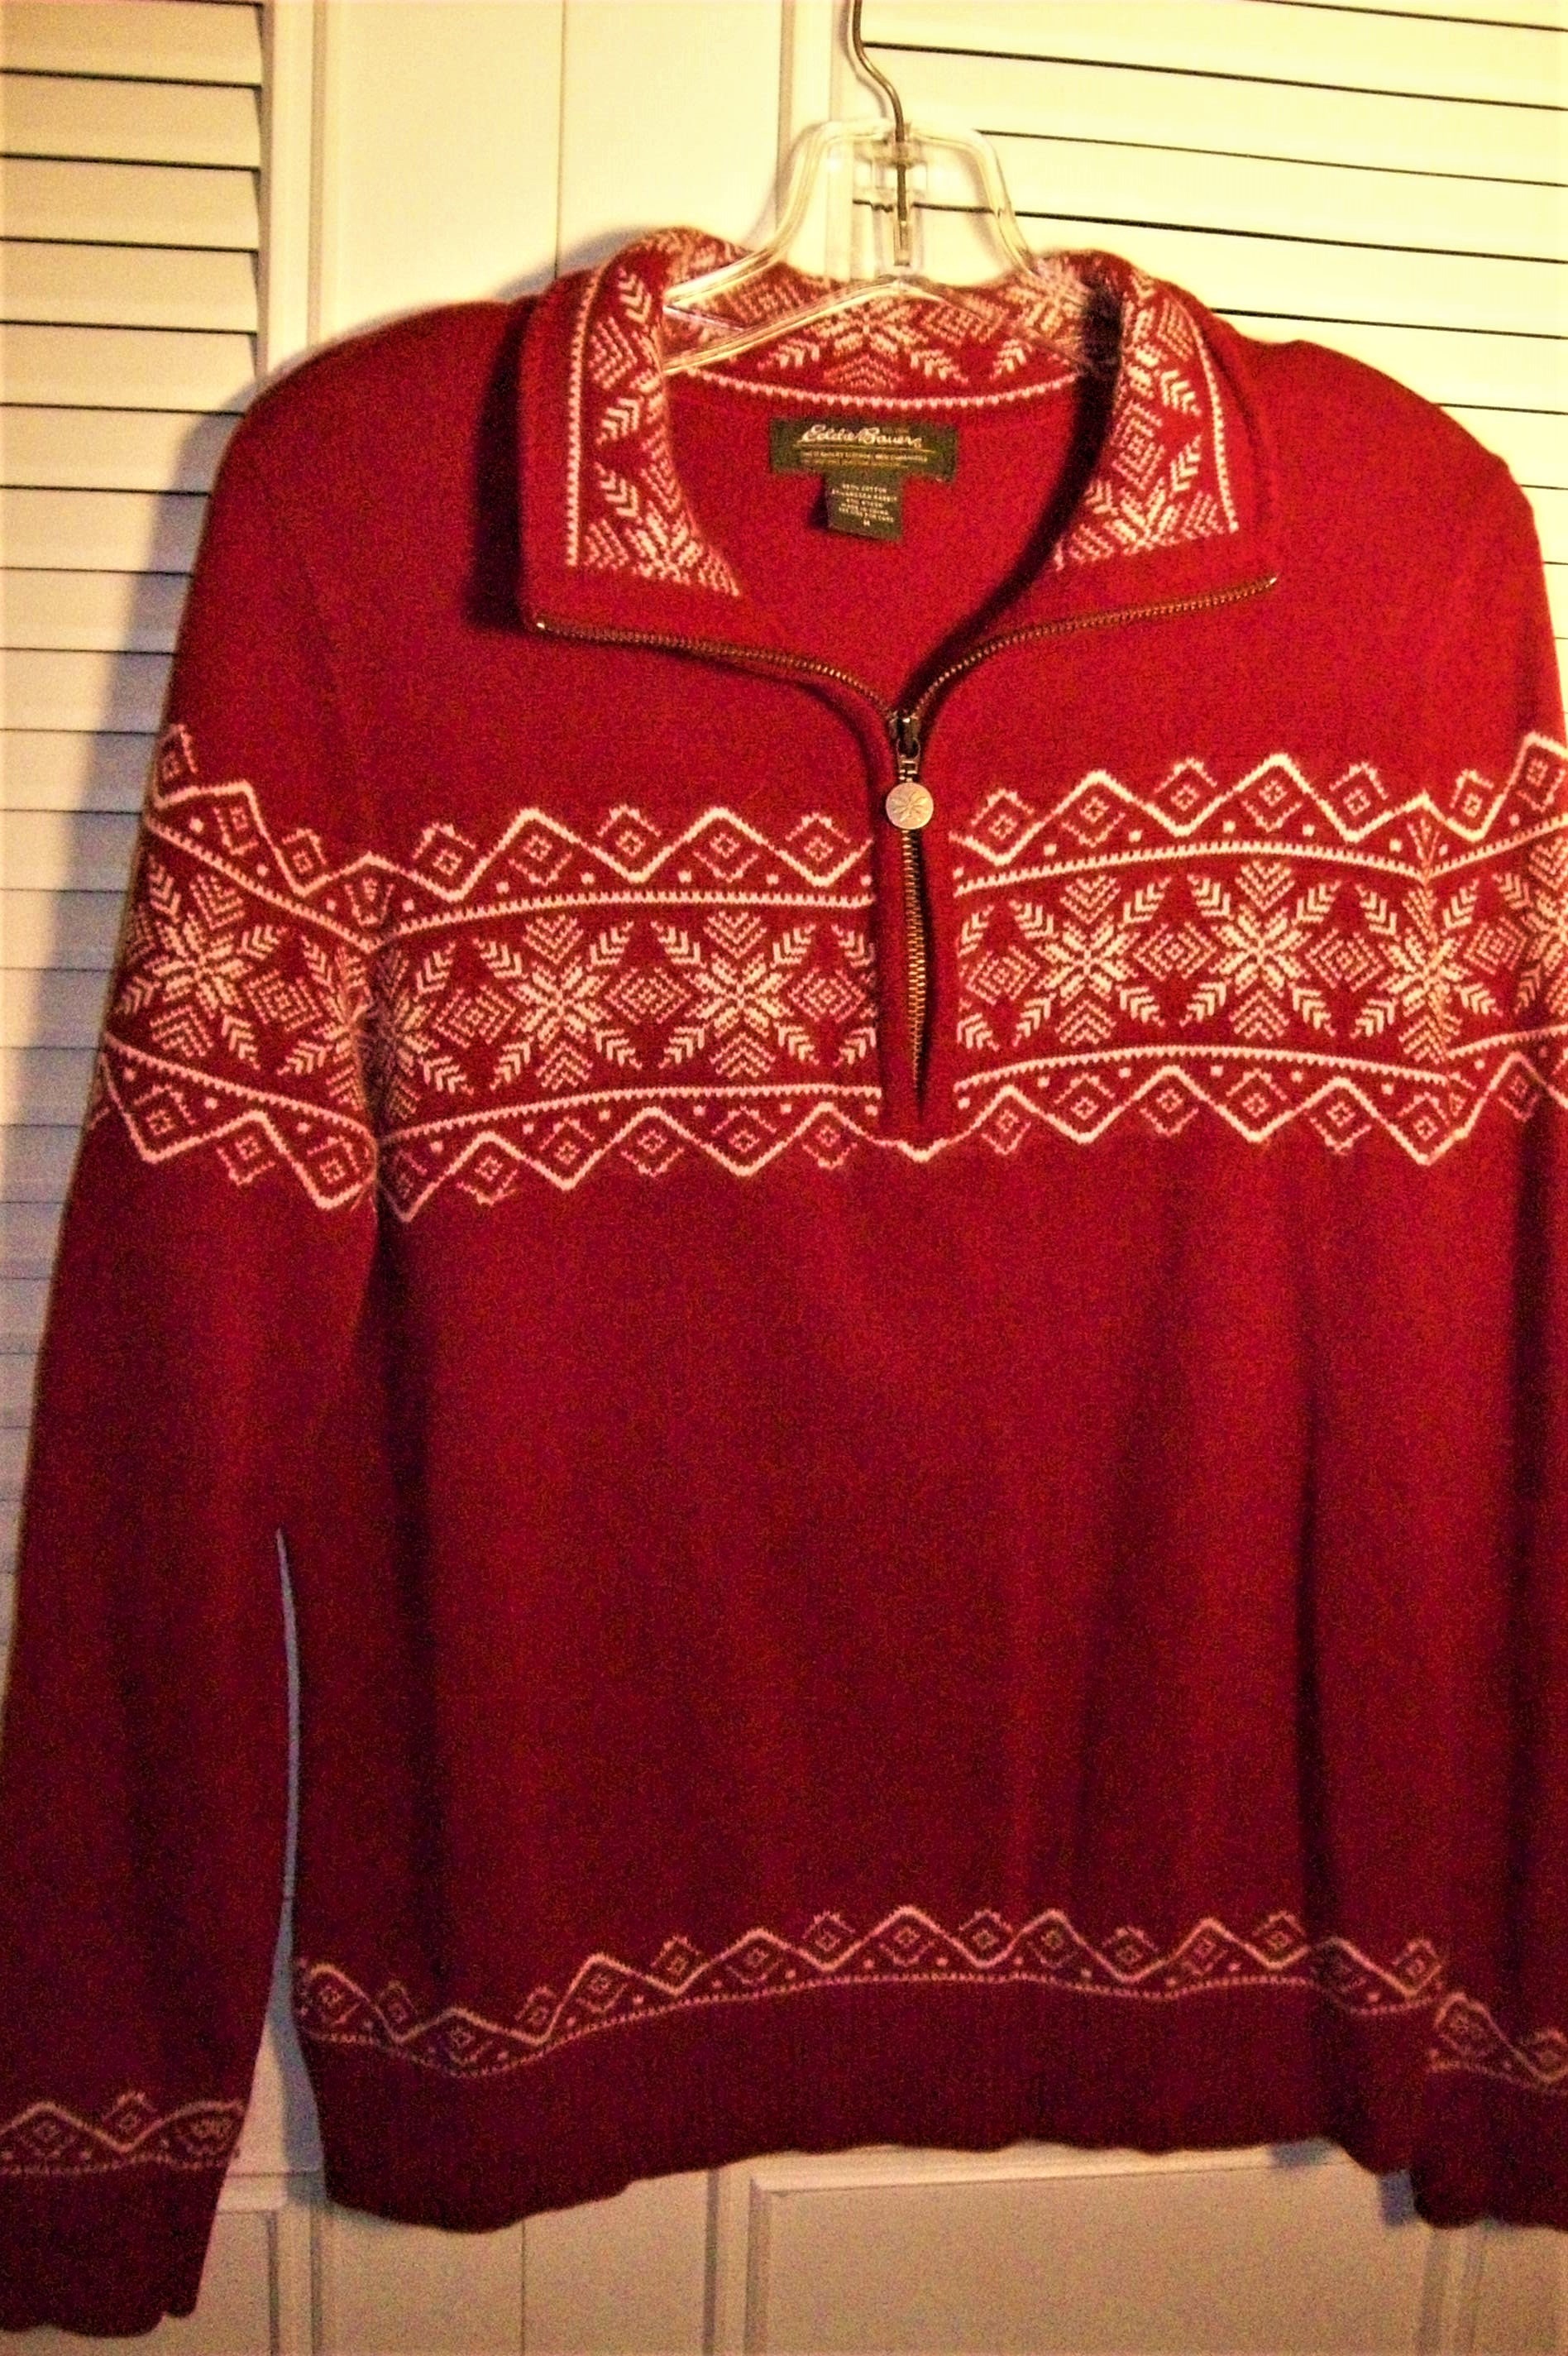 Sweater Medium, Eddie Bauer Cotton Blend Red For Fall Entry, Hint Of Season To Come, - See Details